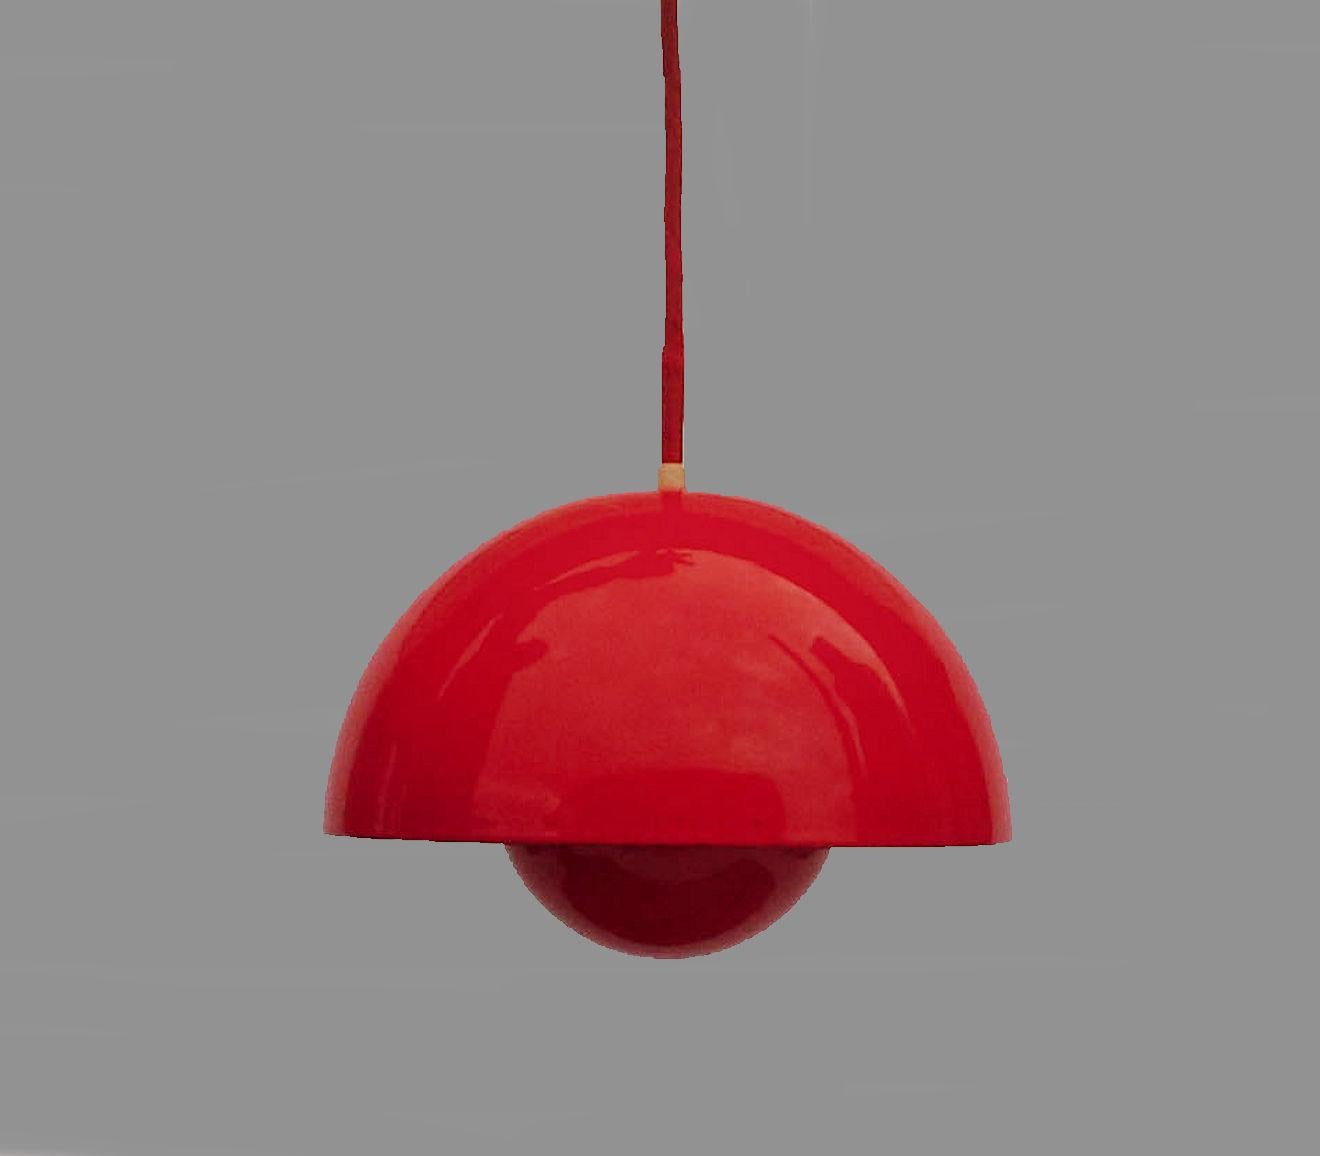 Verner Panton Danish 1´st. Edition Red Flowerpot Pendant designed for Louis Poulsen in 1969.

This pendant is the 1´st. edition in enamel and feature a red enamel lampshade consisting of two semi-circular spheres facing each other. The later models